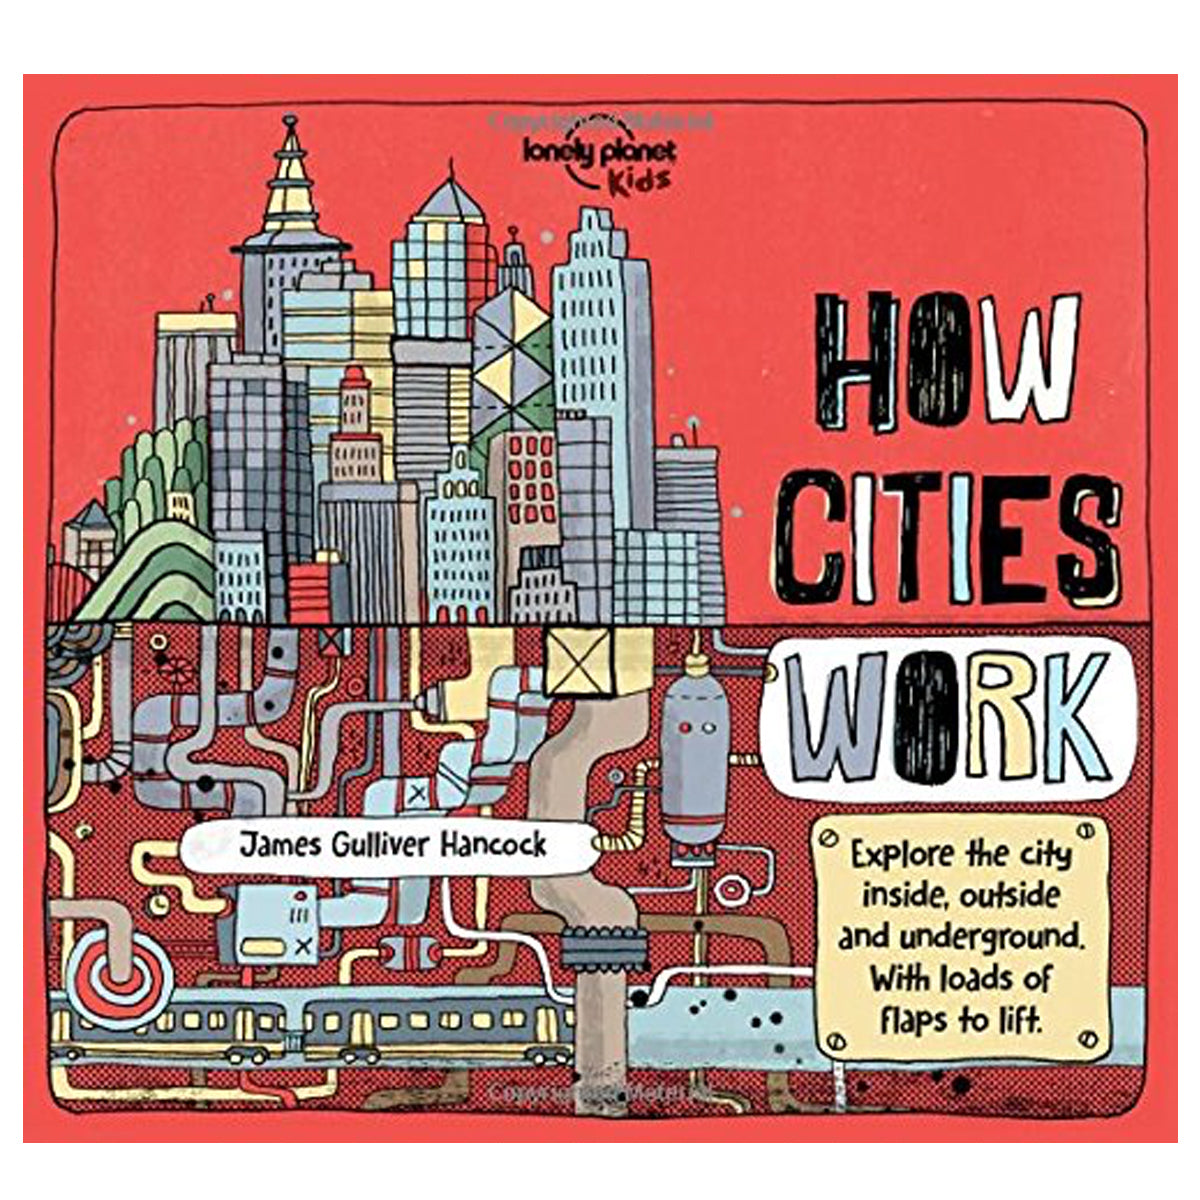 Deer Industries Lonely planet kids How Cities Work. Educational book for kids aged 7-12, great gift. 